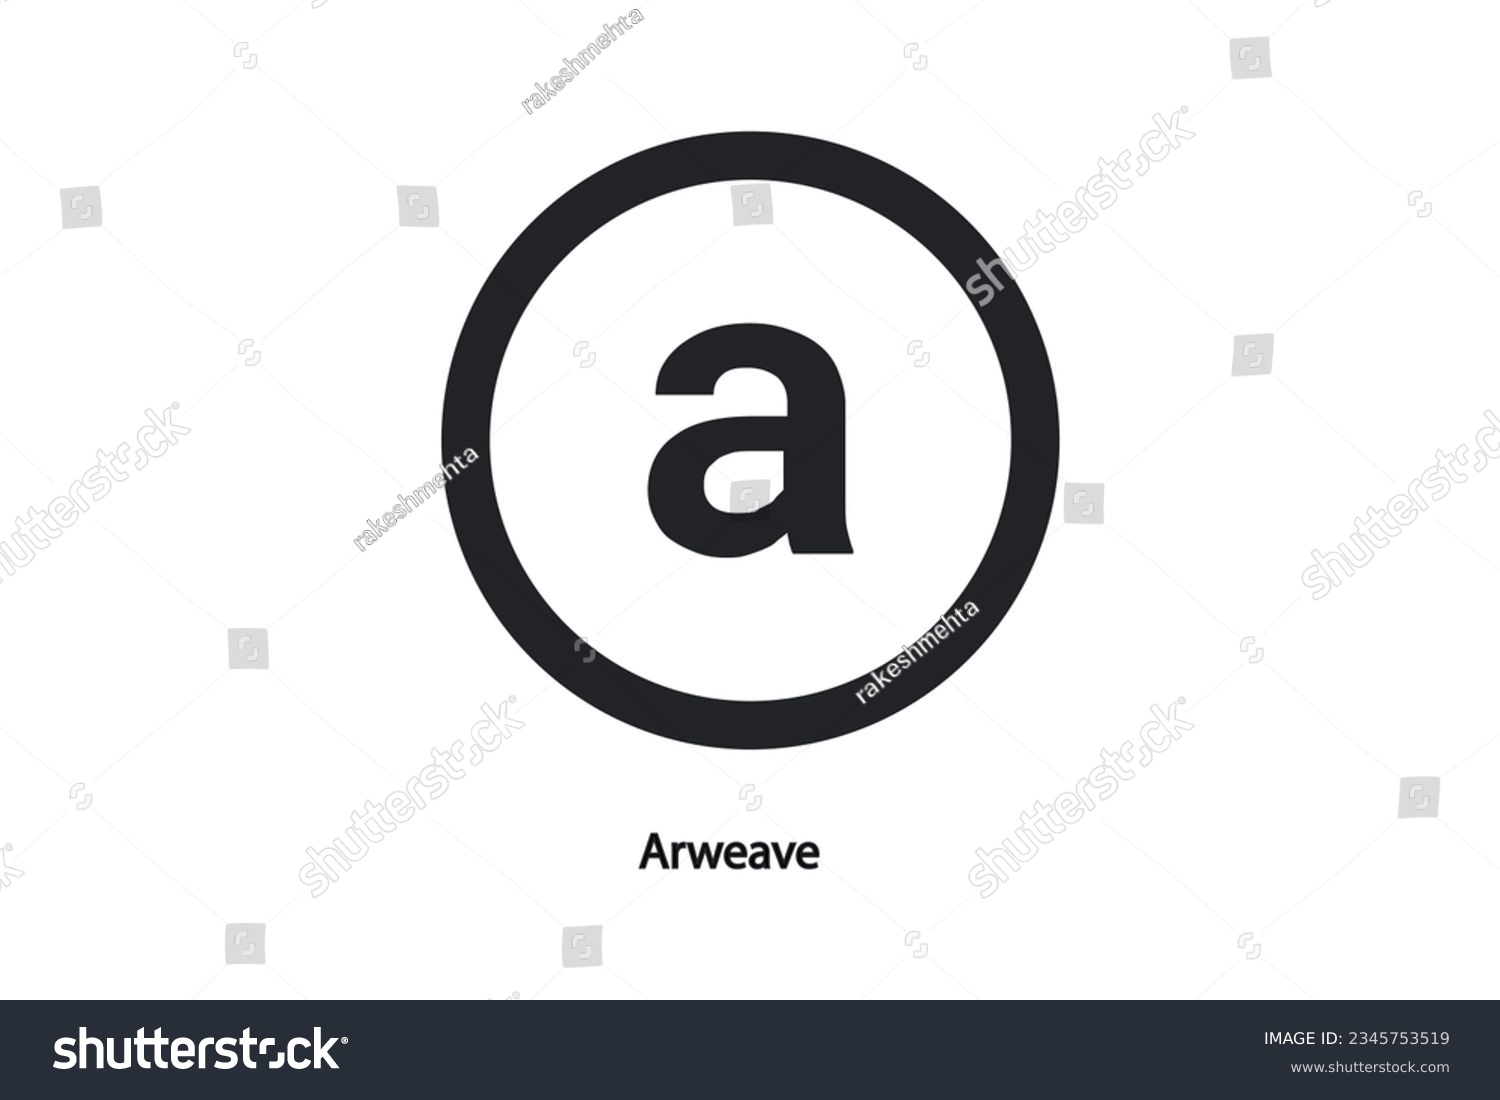 SVG of Arweave  crypto currency  (AR) logo vector illustration design. Can be used as currency icon, badge, label, symbol, sticker and print background template  svg